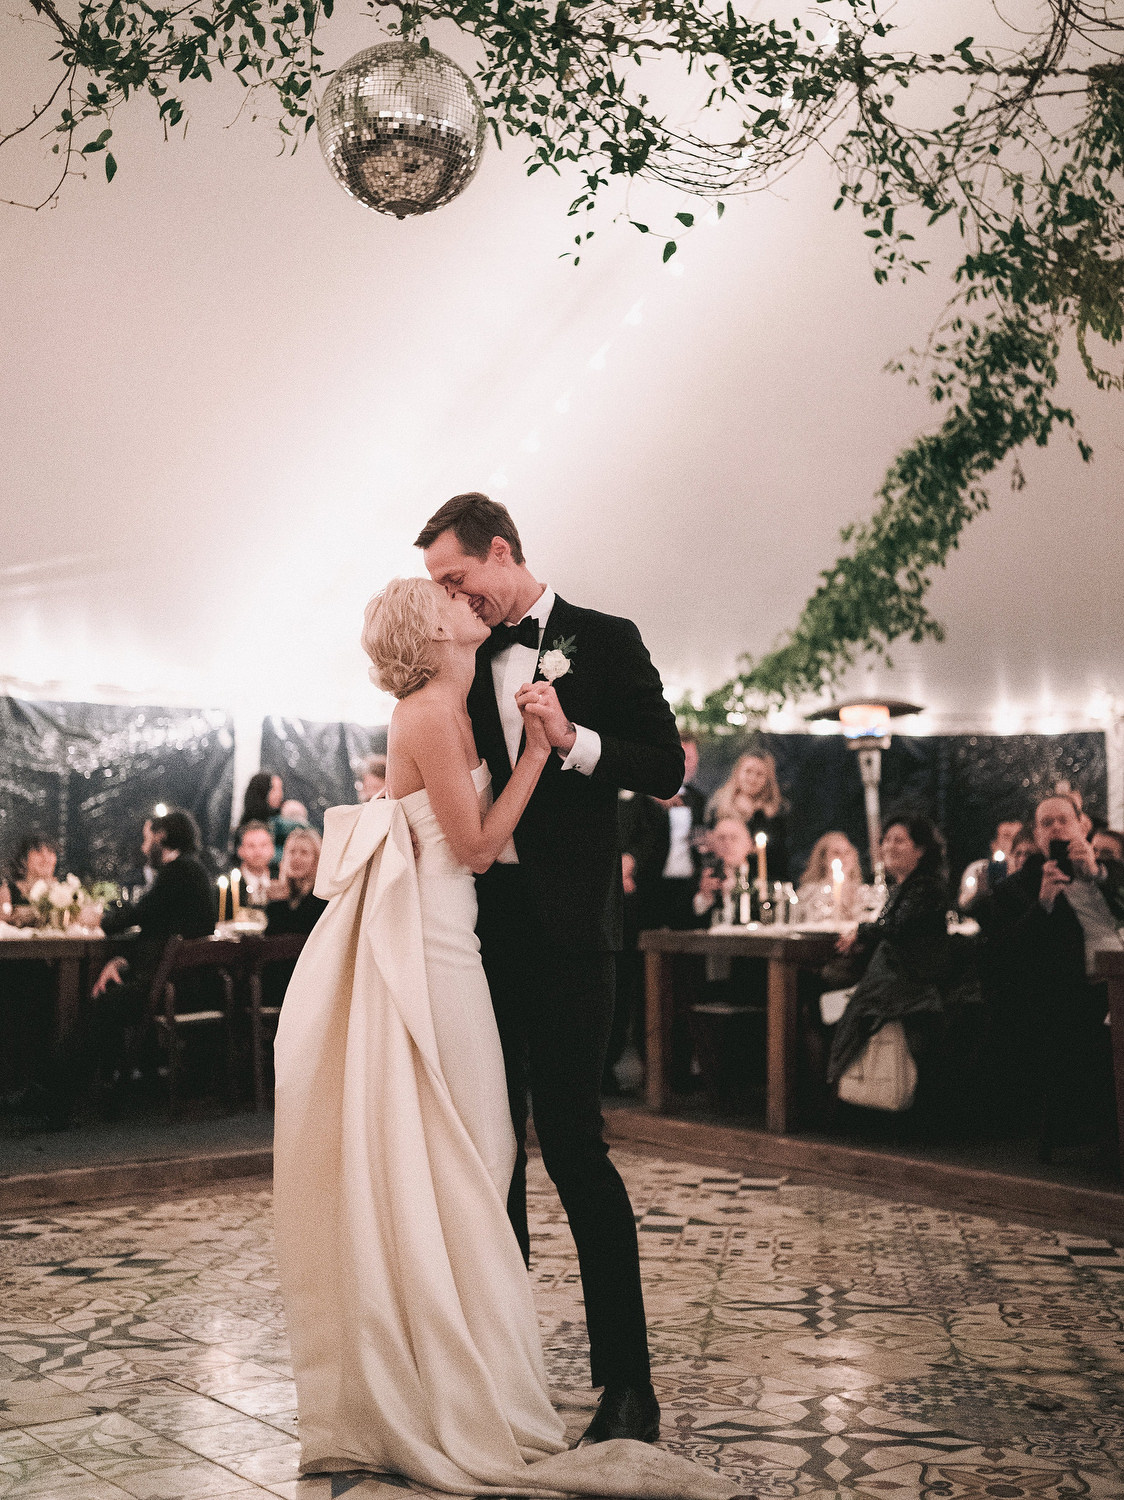 Bride and groom share their first dance under a beautiful hanging vine and a big disco ball.